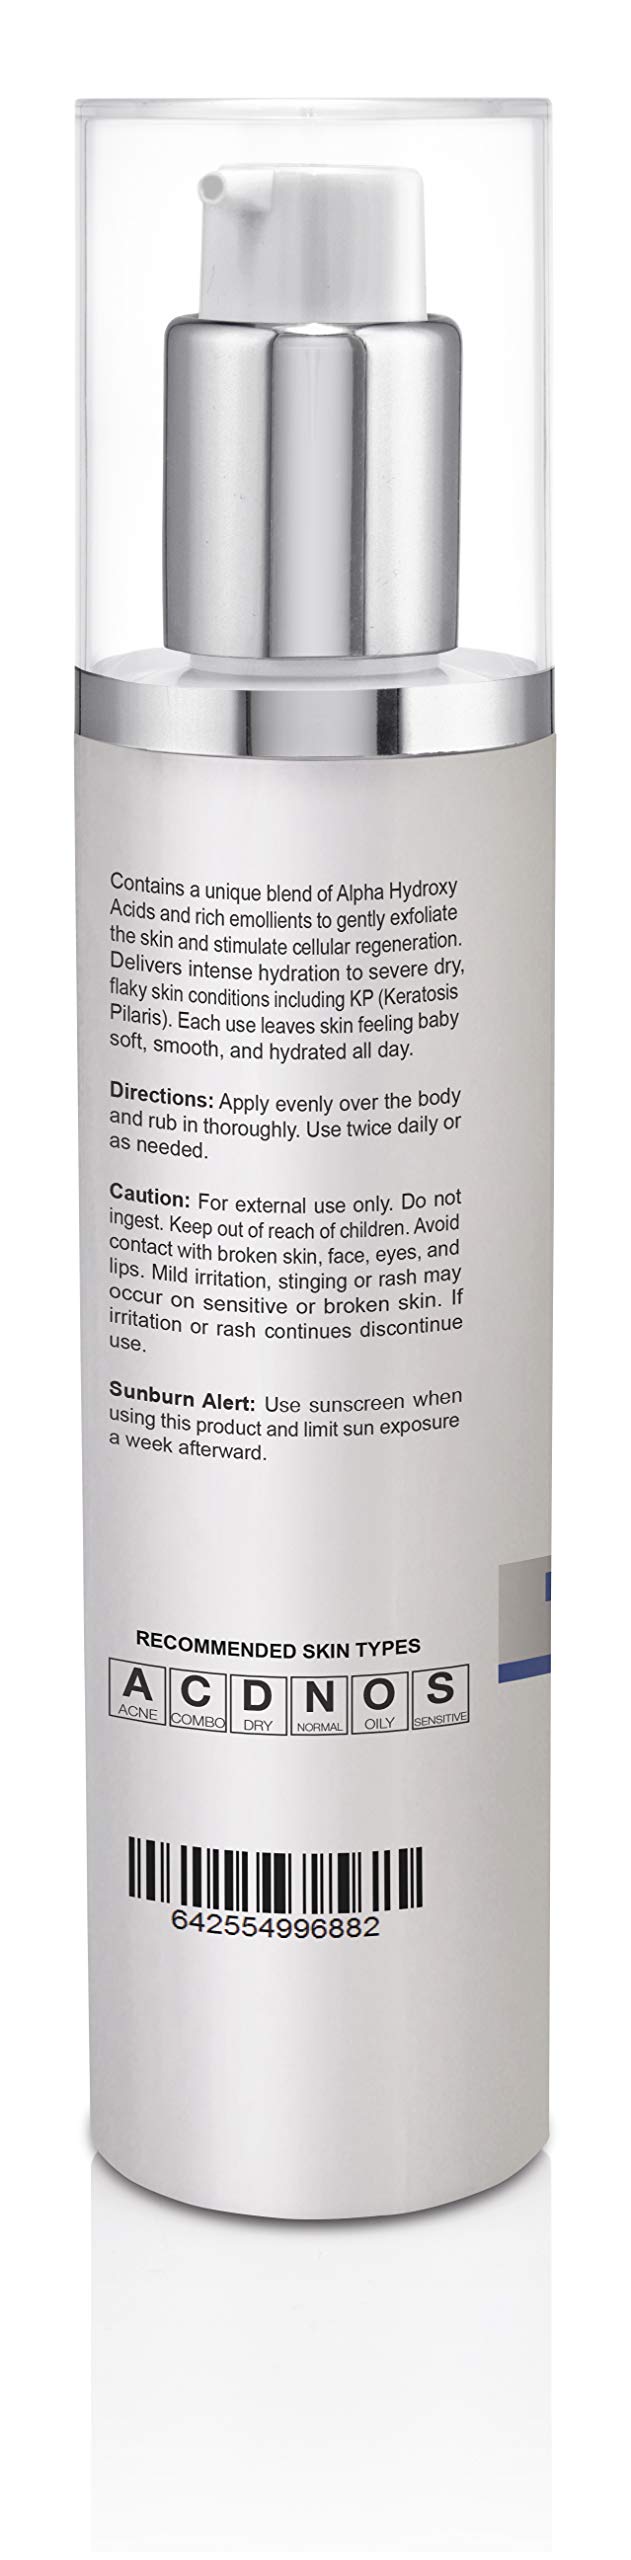 KP Exfoliating Body Lotion- Keratosis Pilaris Moisturizing Treatment for Rough, Dry, Flakey & Bumpy Skin Conditions with Lactic Acid, AHA. Smooth, Soft & Hydrate Skin Relief Cream. - BeesActive Australia